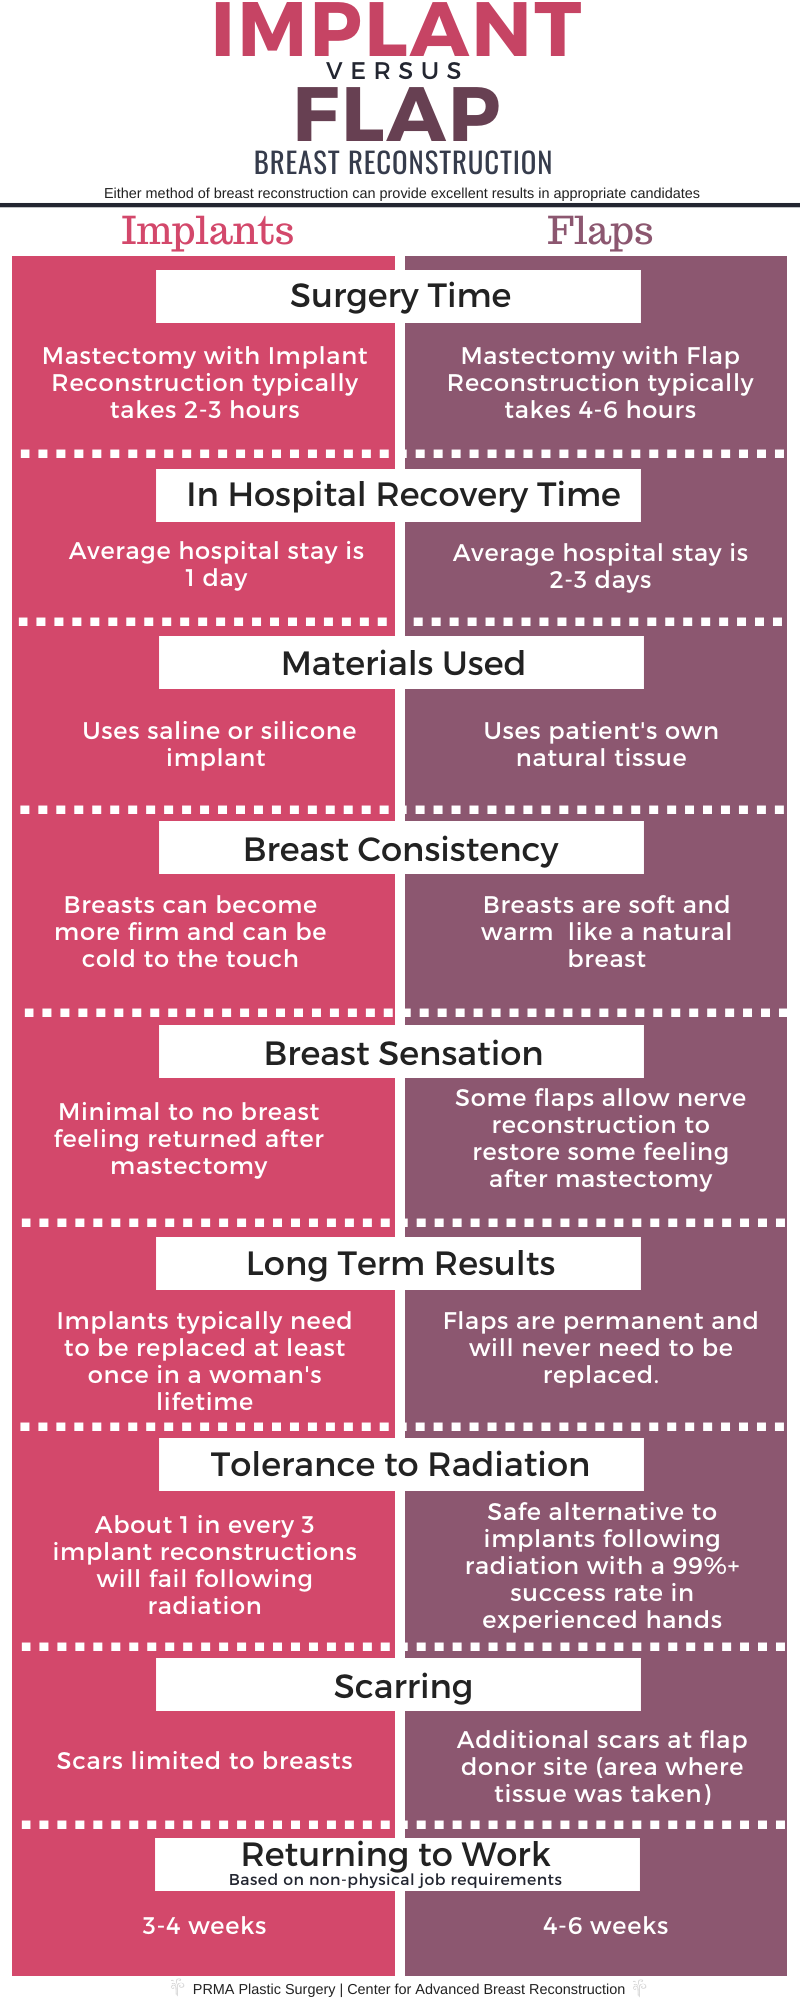 differences between implants and diep flap breast reconstruction - prma plastic surgery